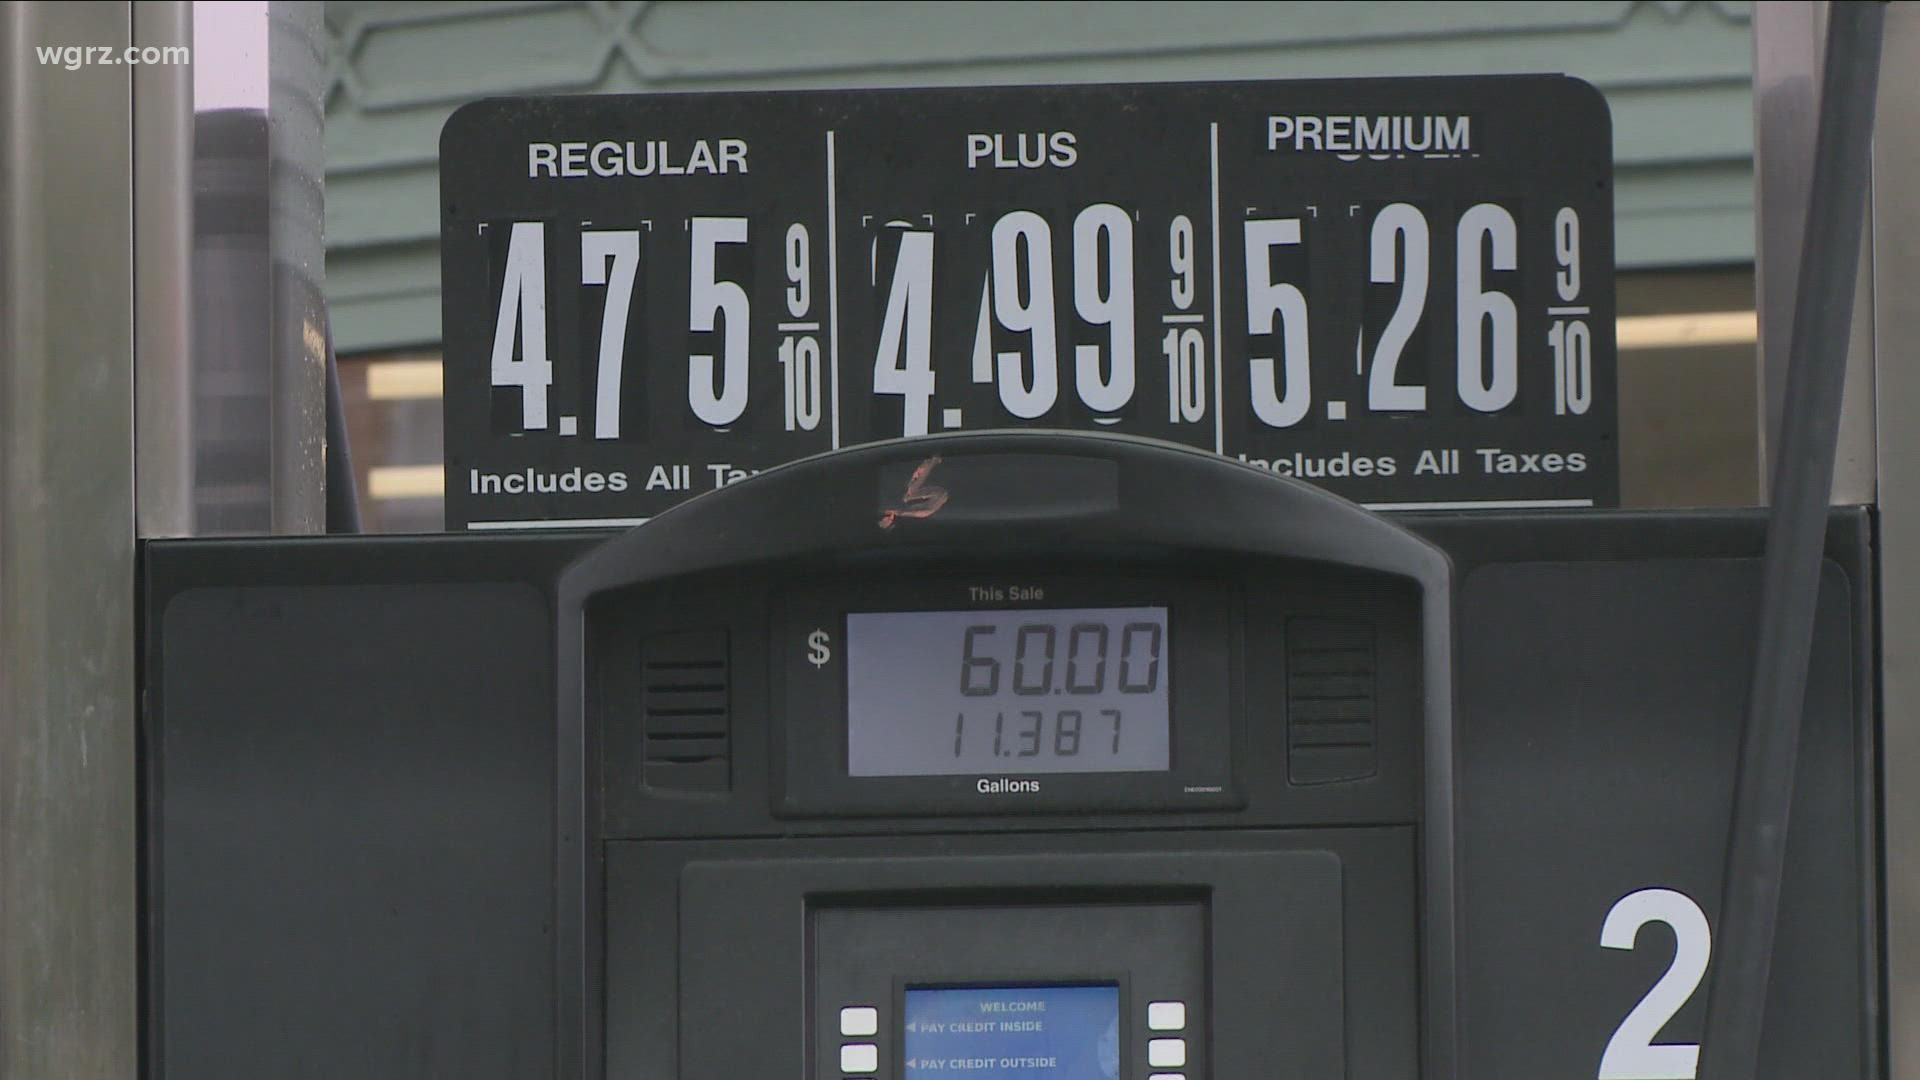 Questions About Potential Gas Price Gouging